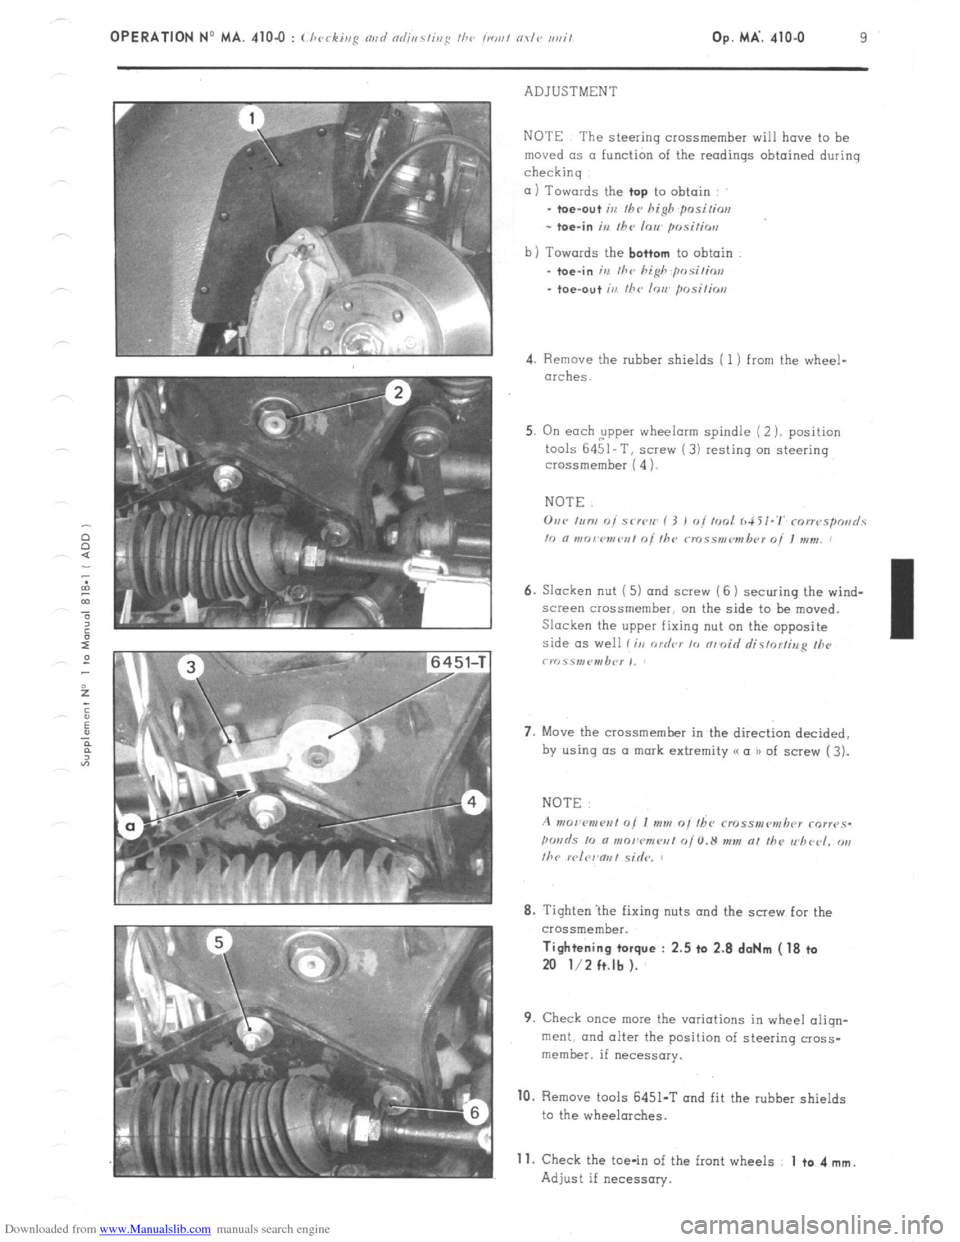 Citroen CX 1985 1.G Workshop Manual Downloaded from www.Manualslib.com manuals search engine OPERATION No MA. 4104 : (./ , k’  1<c a,,g I,<  n / nd;i,,s/i,,g I/><, jr.or,/ ovl<, ,,i,it Op. MA’. 410-O 9 
ADJUSTMENT 
NOTE The steering